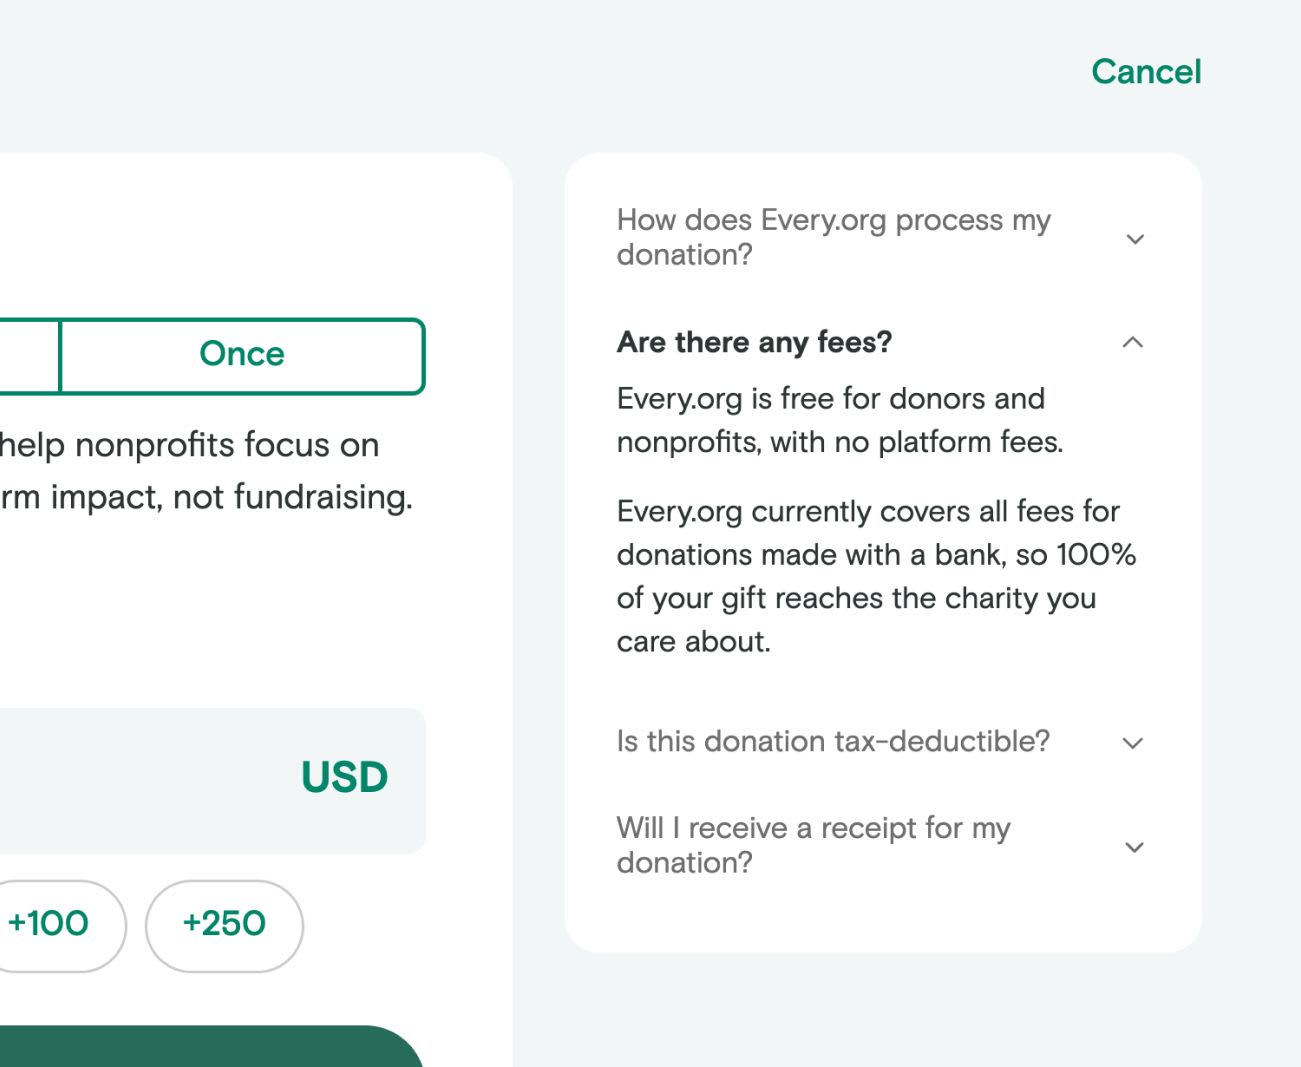 A closeup of the FAQ section of the new donation flow. One of the questions has been expanded to reveal the answer.